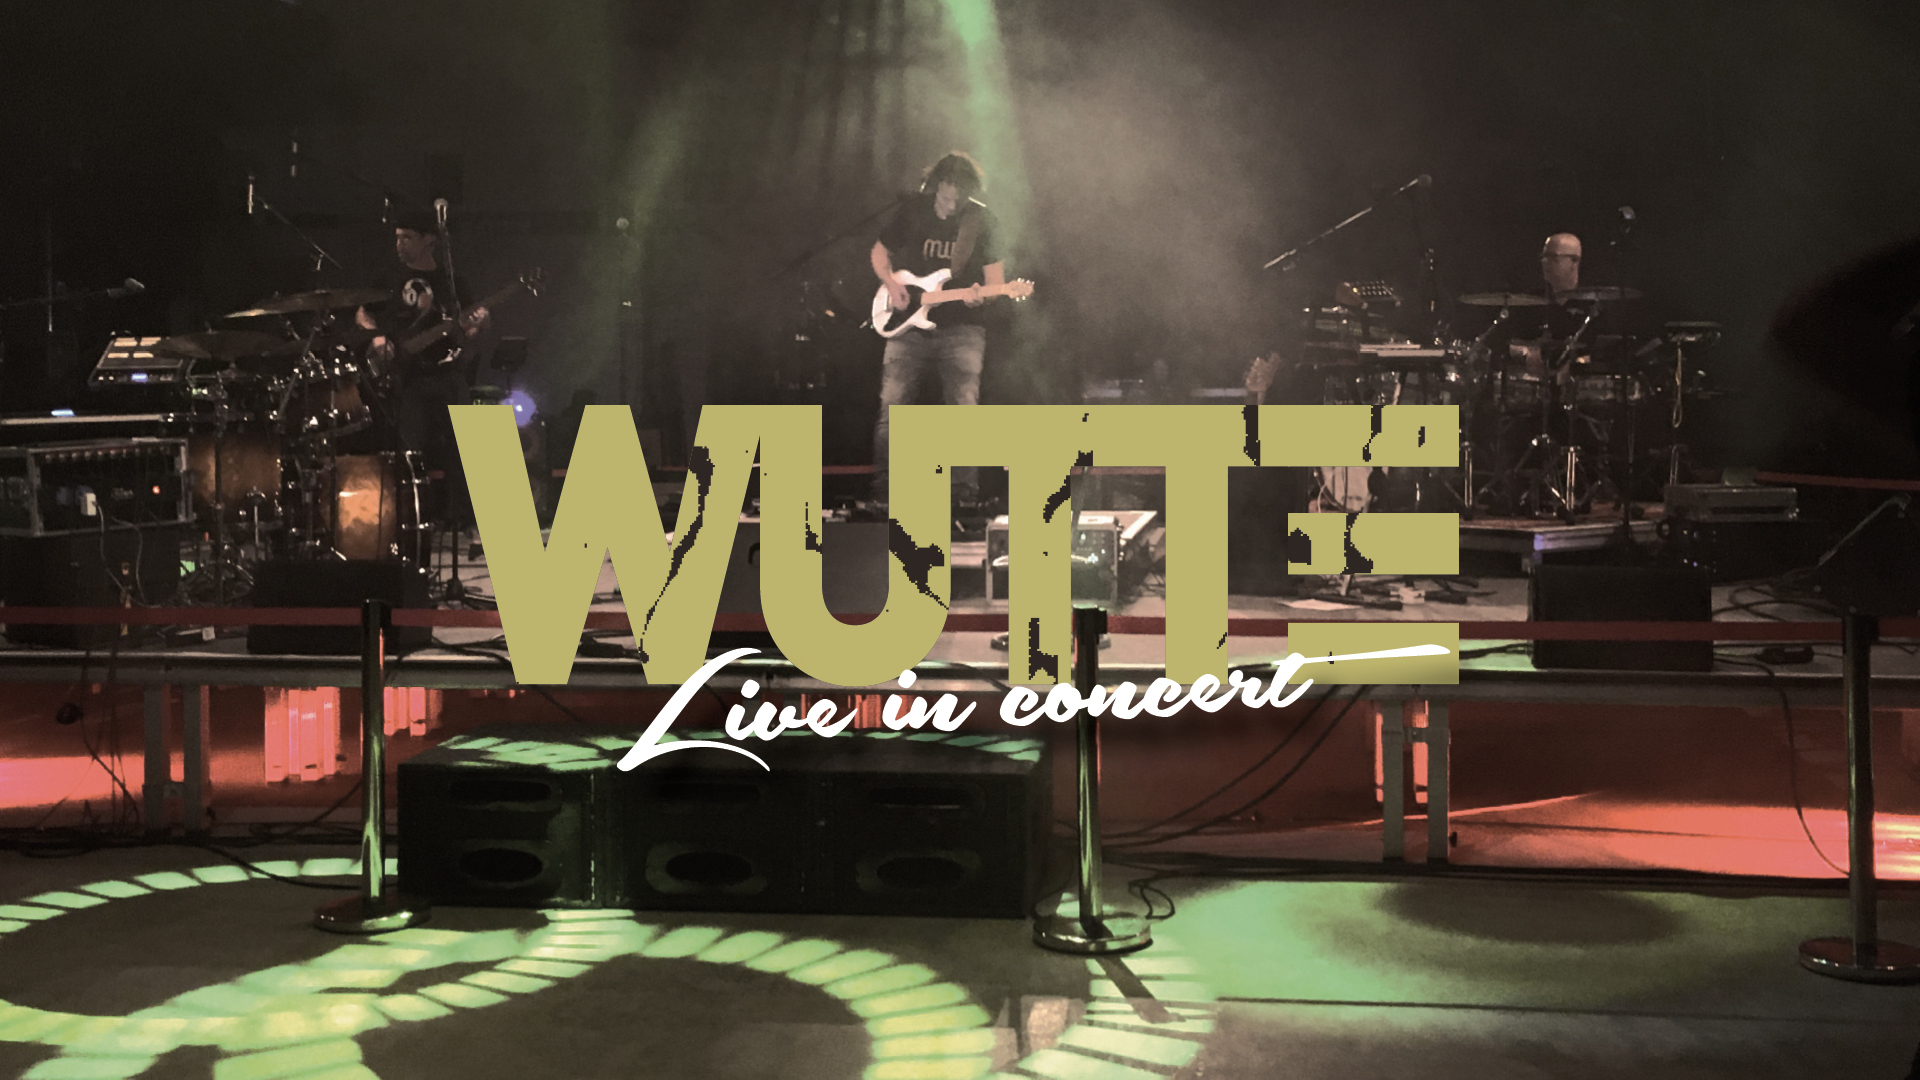 WUTTE live in der Ossiacher See Halle.